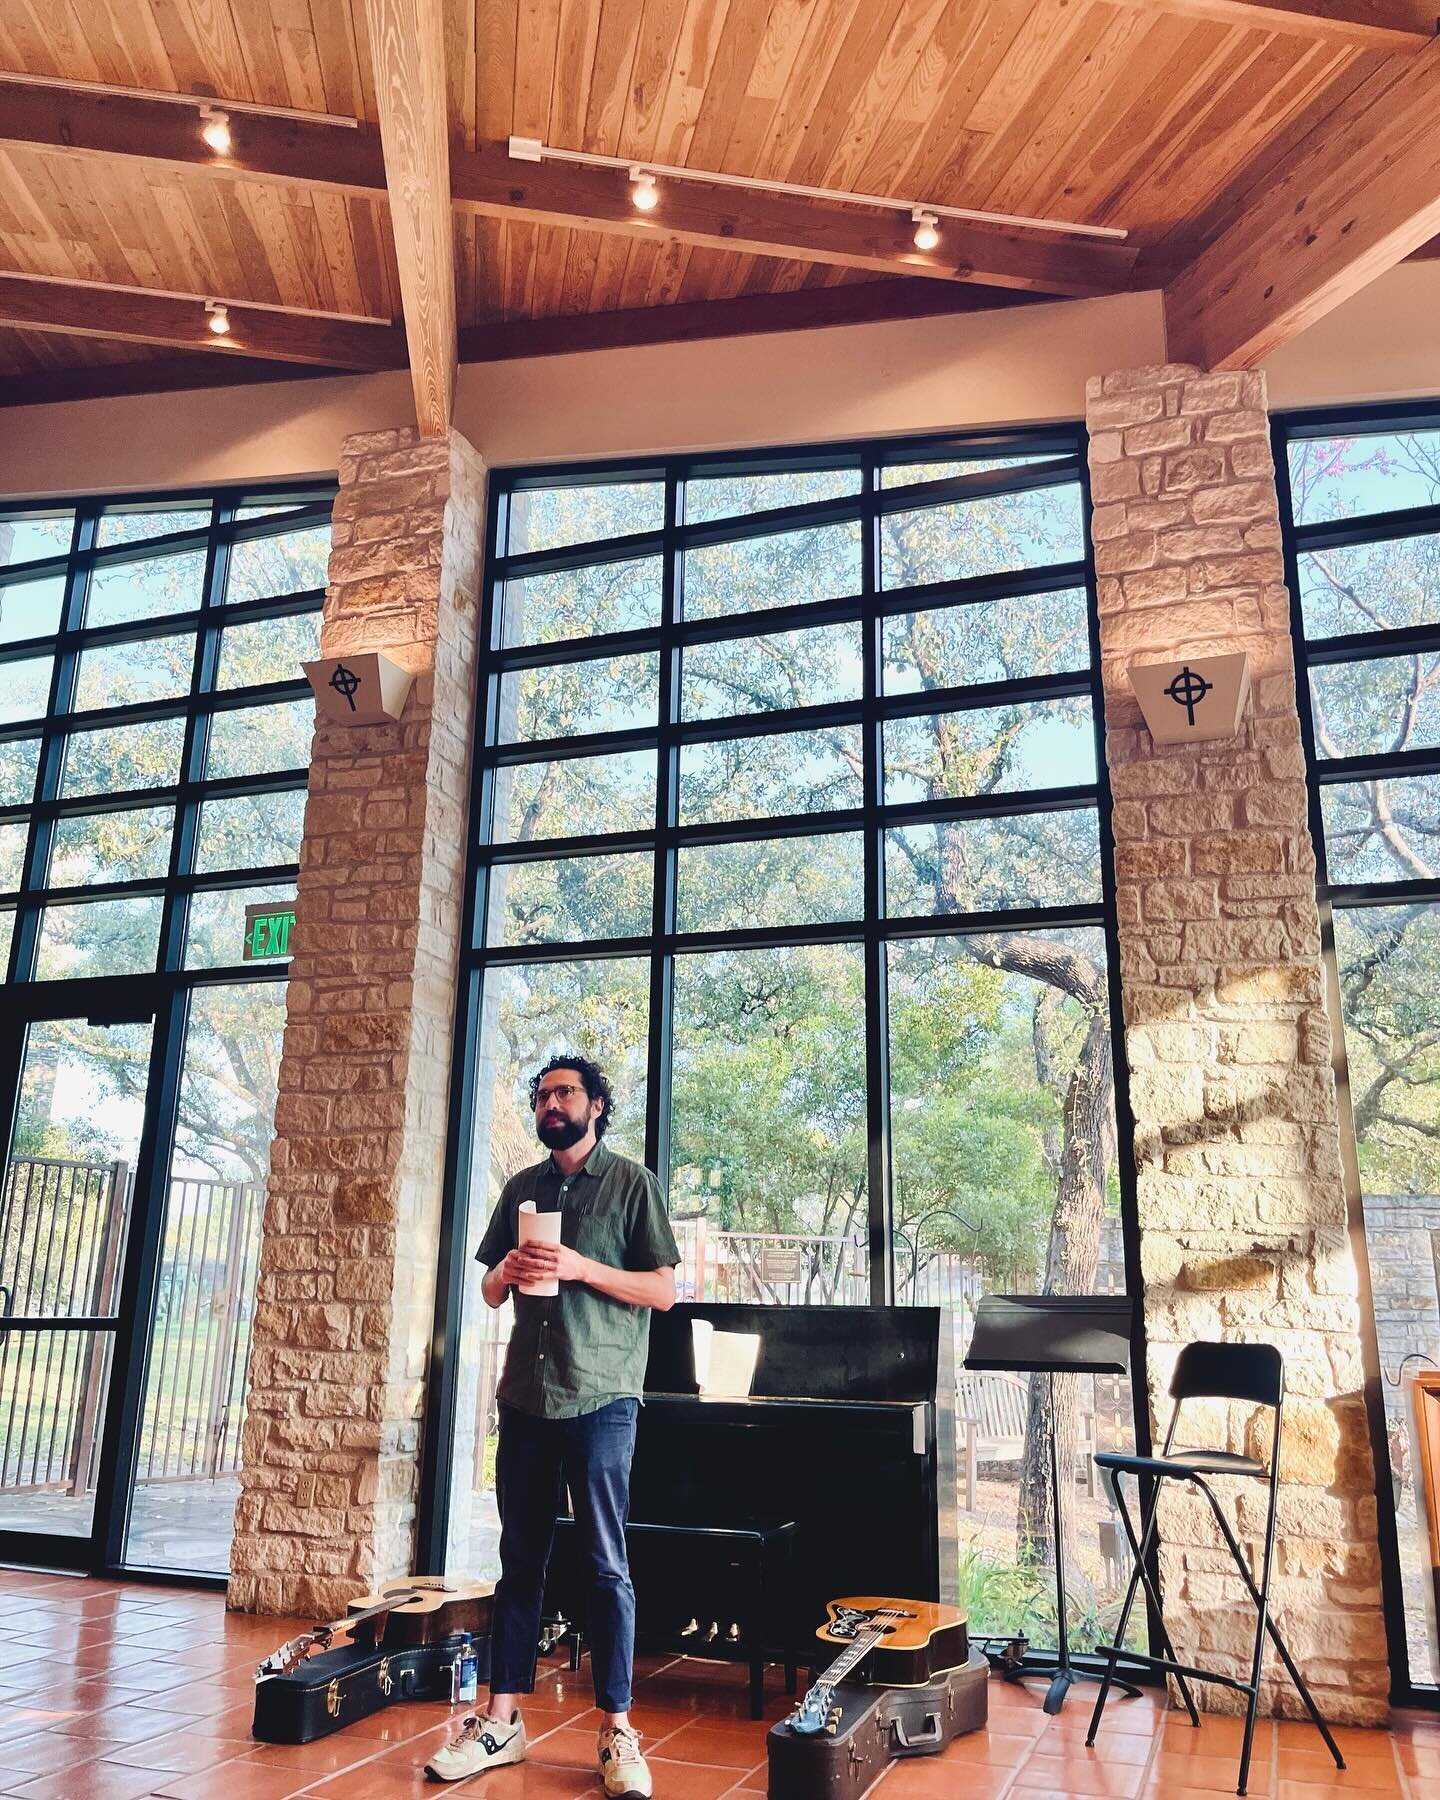 Last Lyrics for Lent TONIGHT! 6:15 pm. And rumors are swirling throughout central Texas that @iamjonguerra is going to be playing a full slate of new songs 👀